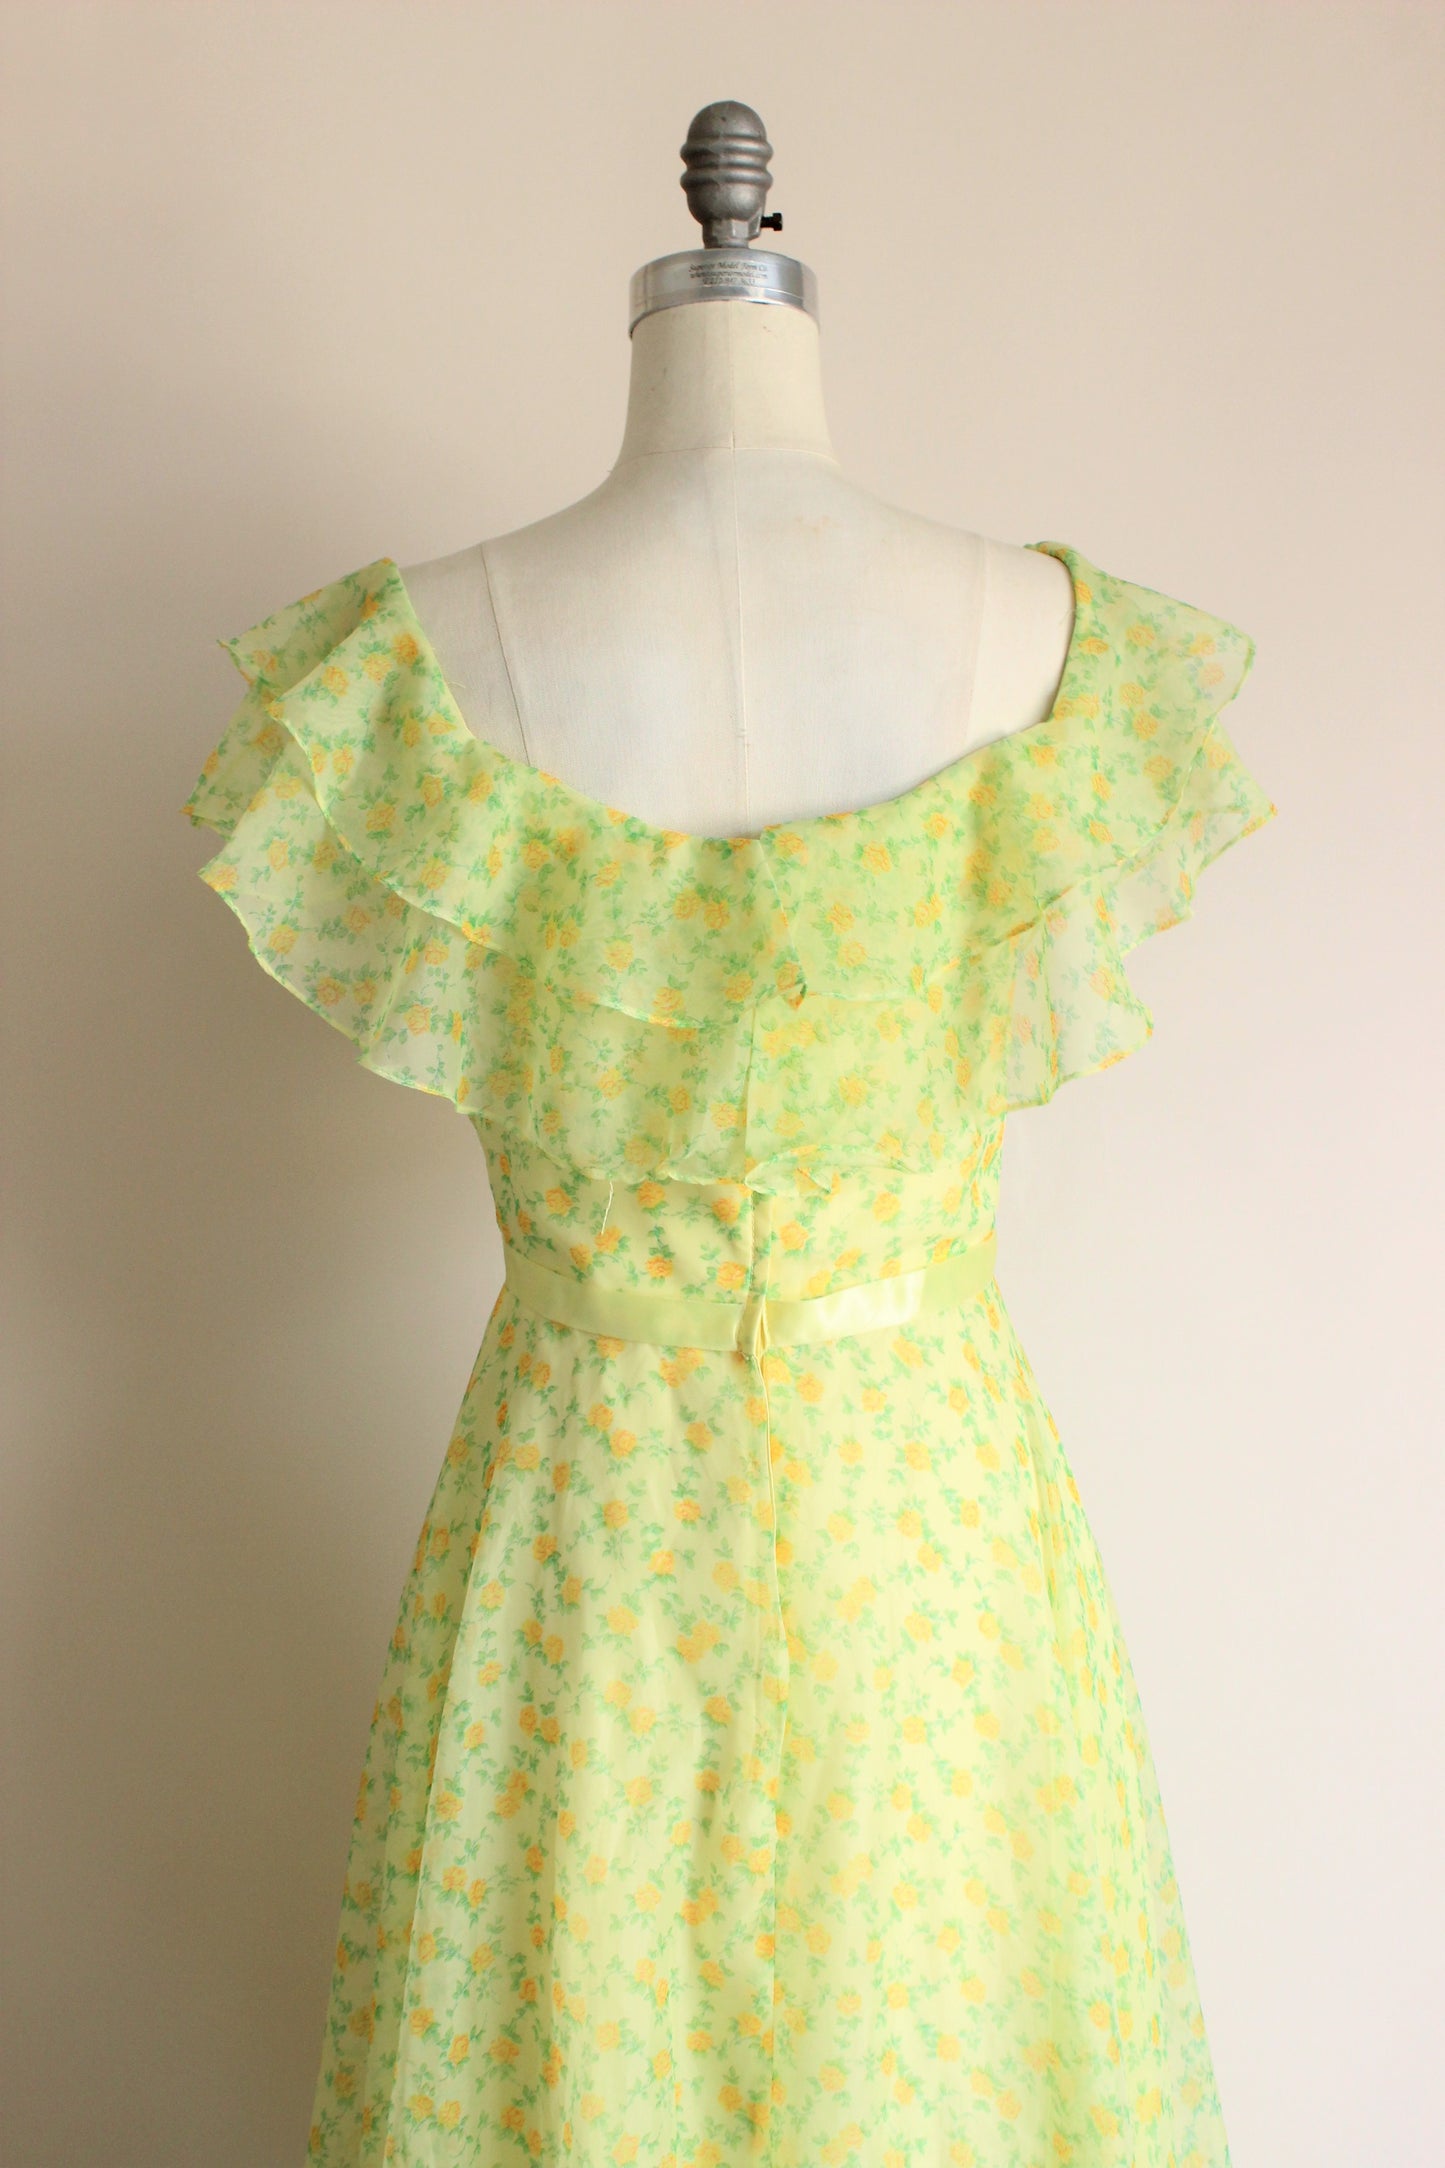 Vintage 1970s Yellow and Green Floral Maxi Dress